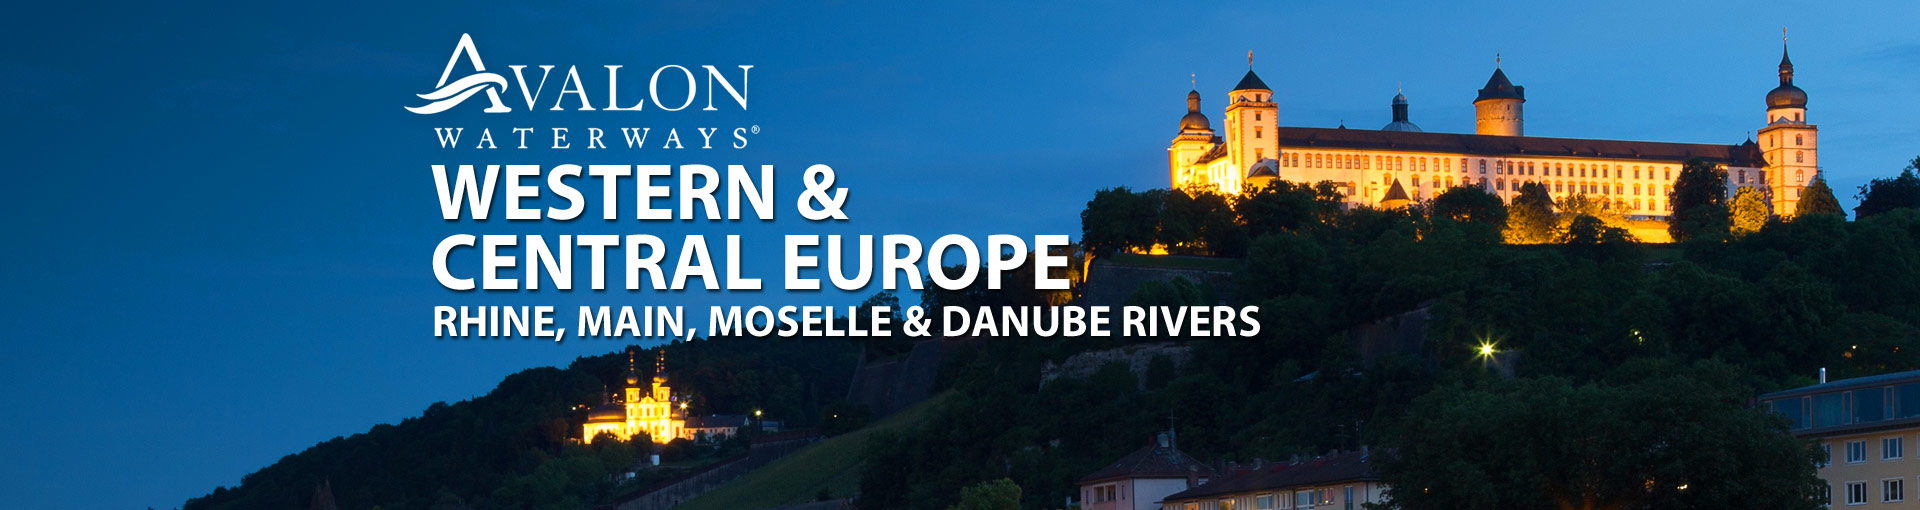 Avalon Waterways River Cruises to Western and Central Europe